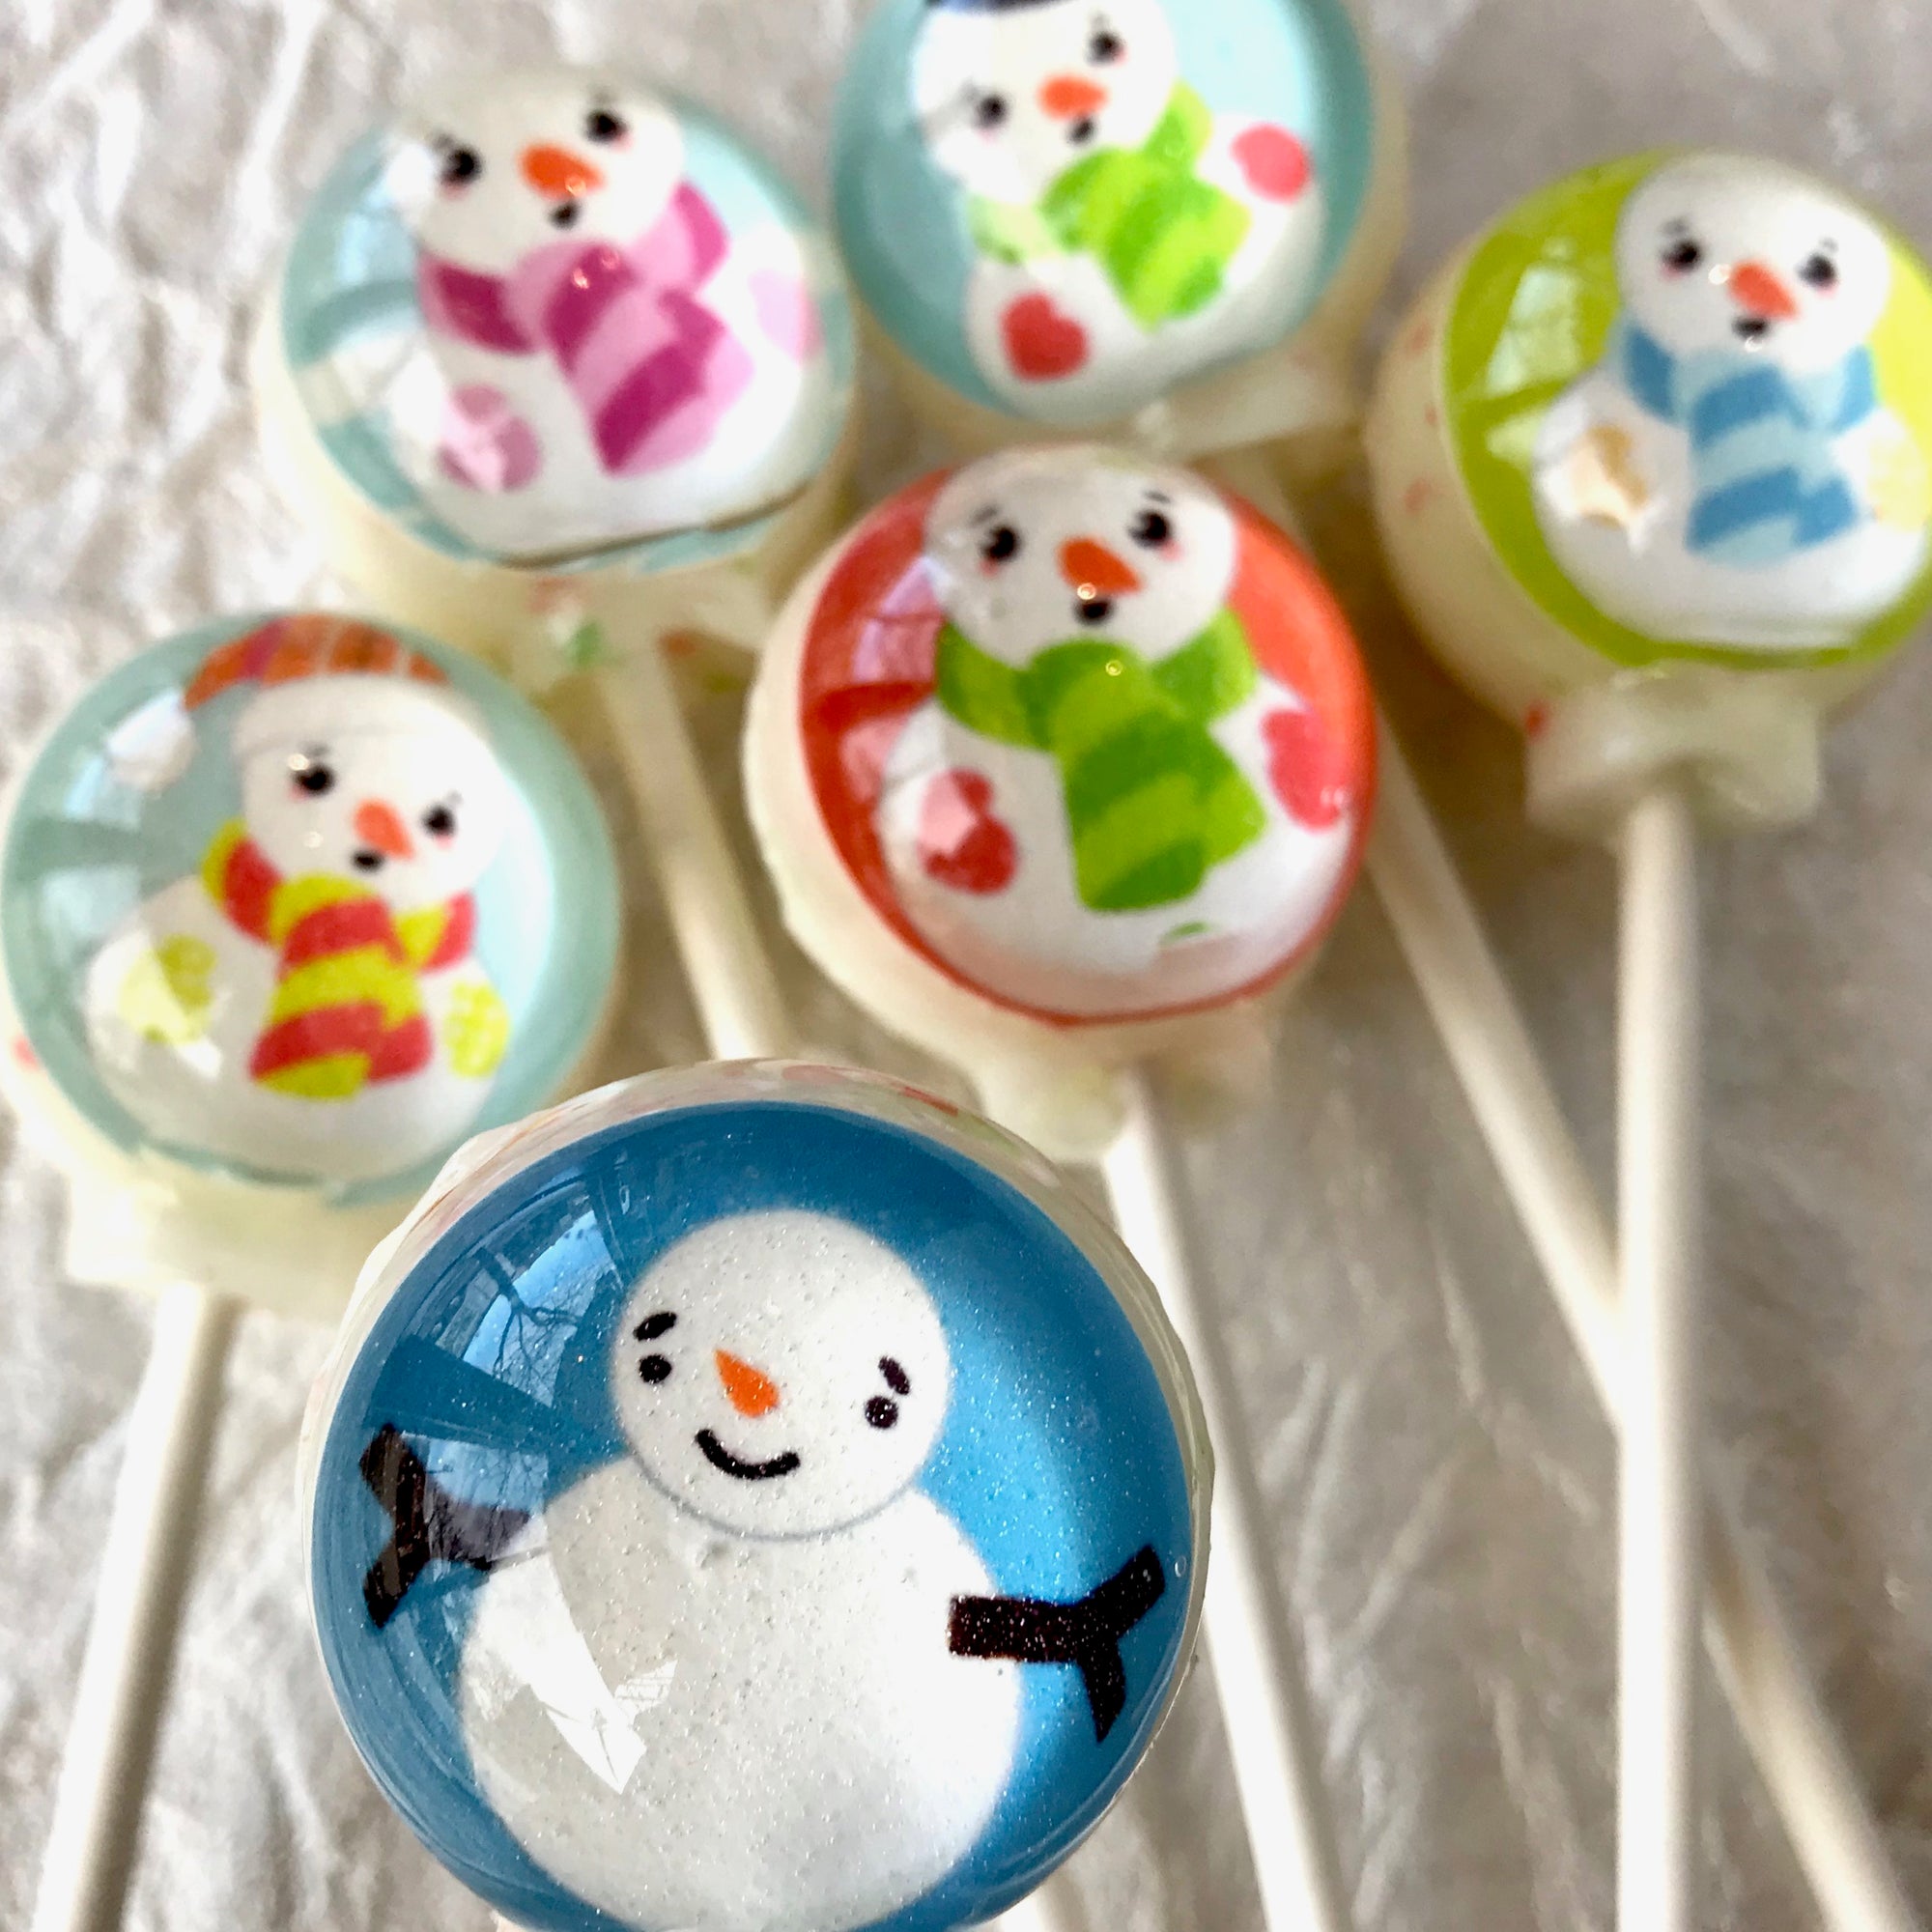 Colorful Snowman Lollipops 6-piece set by I Want Candy!